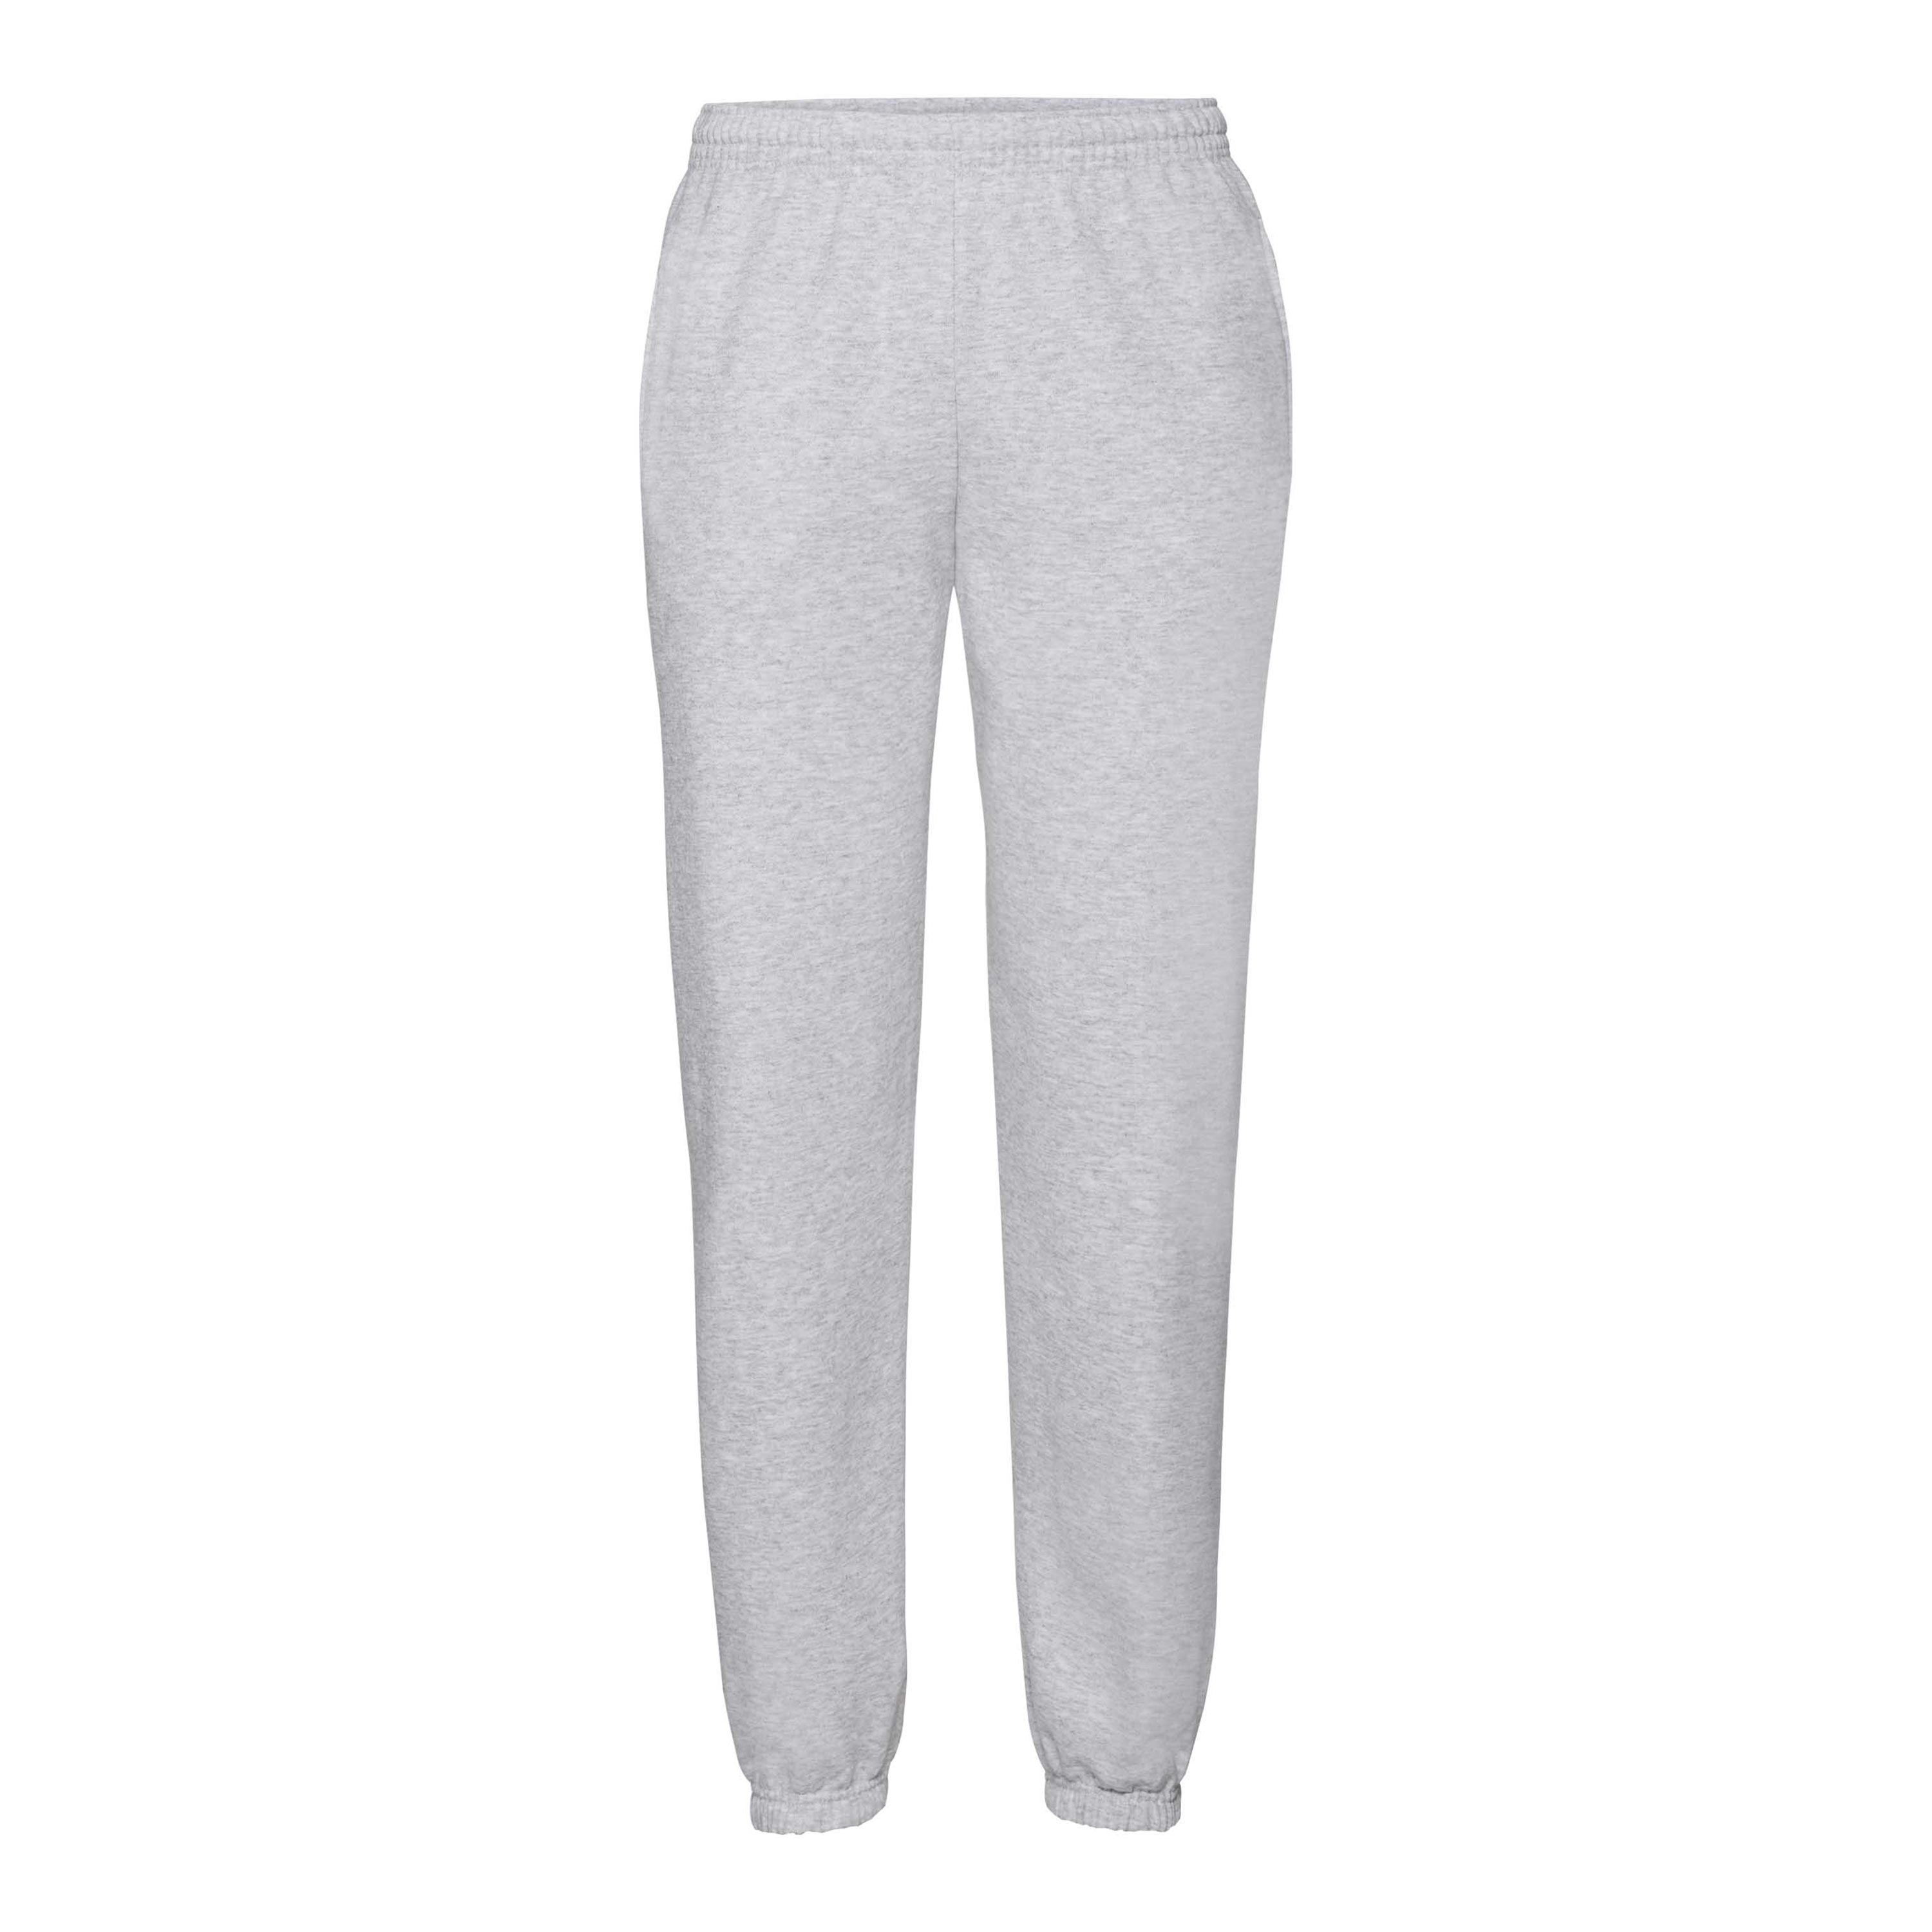 Purchase the Fruit of the Loom Classic Jogging Pants gray mottle